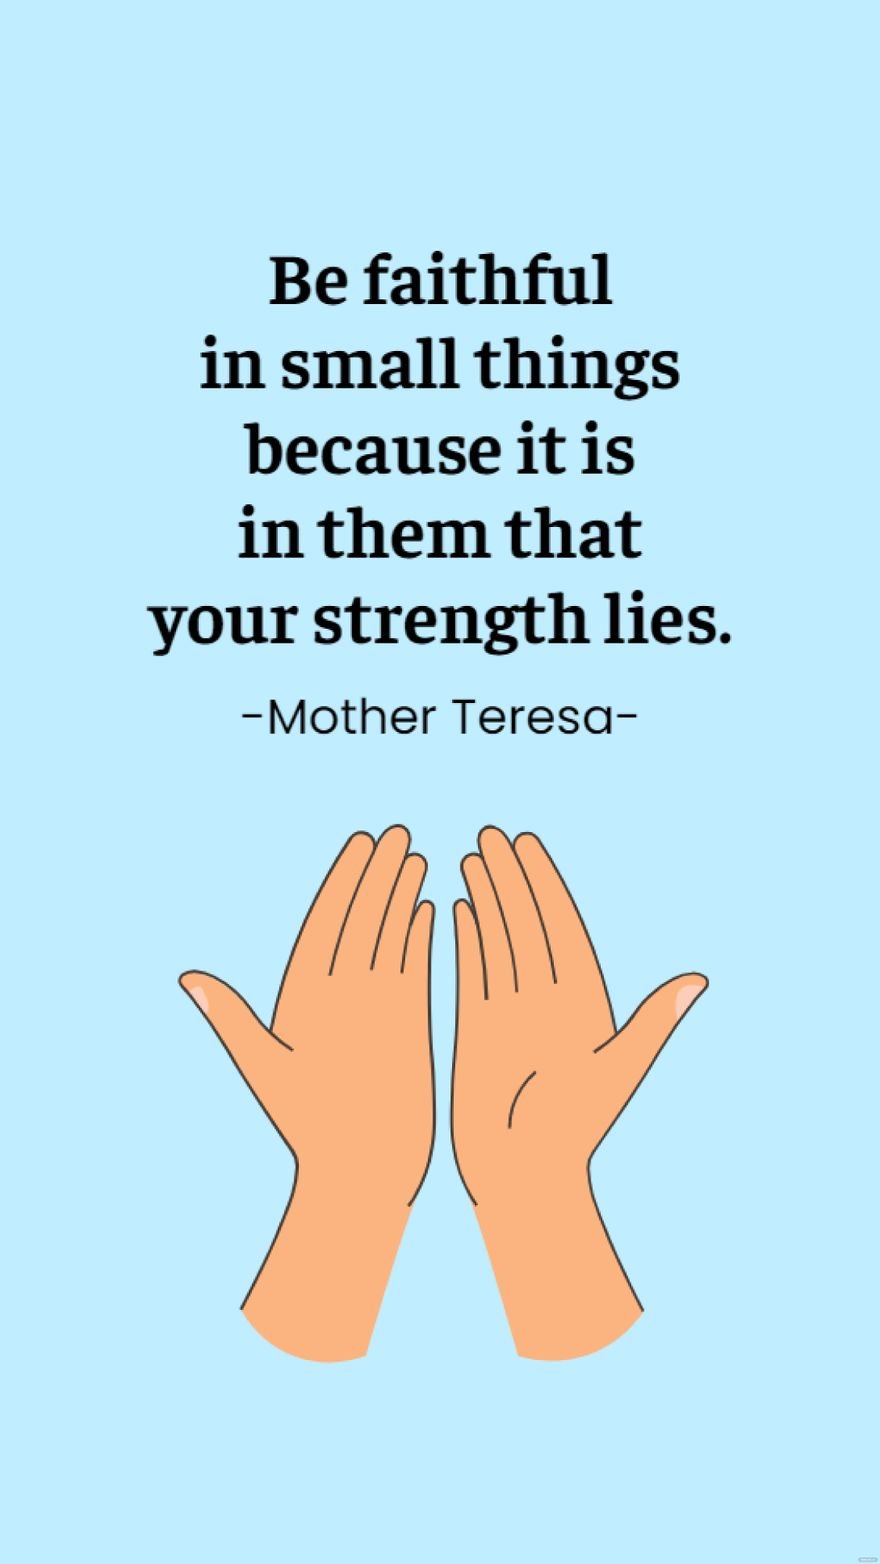 Mother Teresa - Be faithful in small things because it is in them that your strength lies.